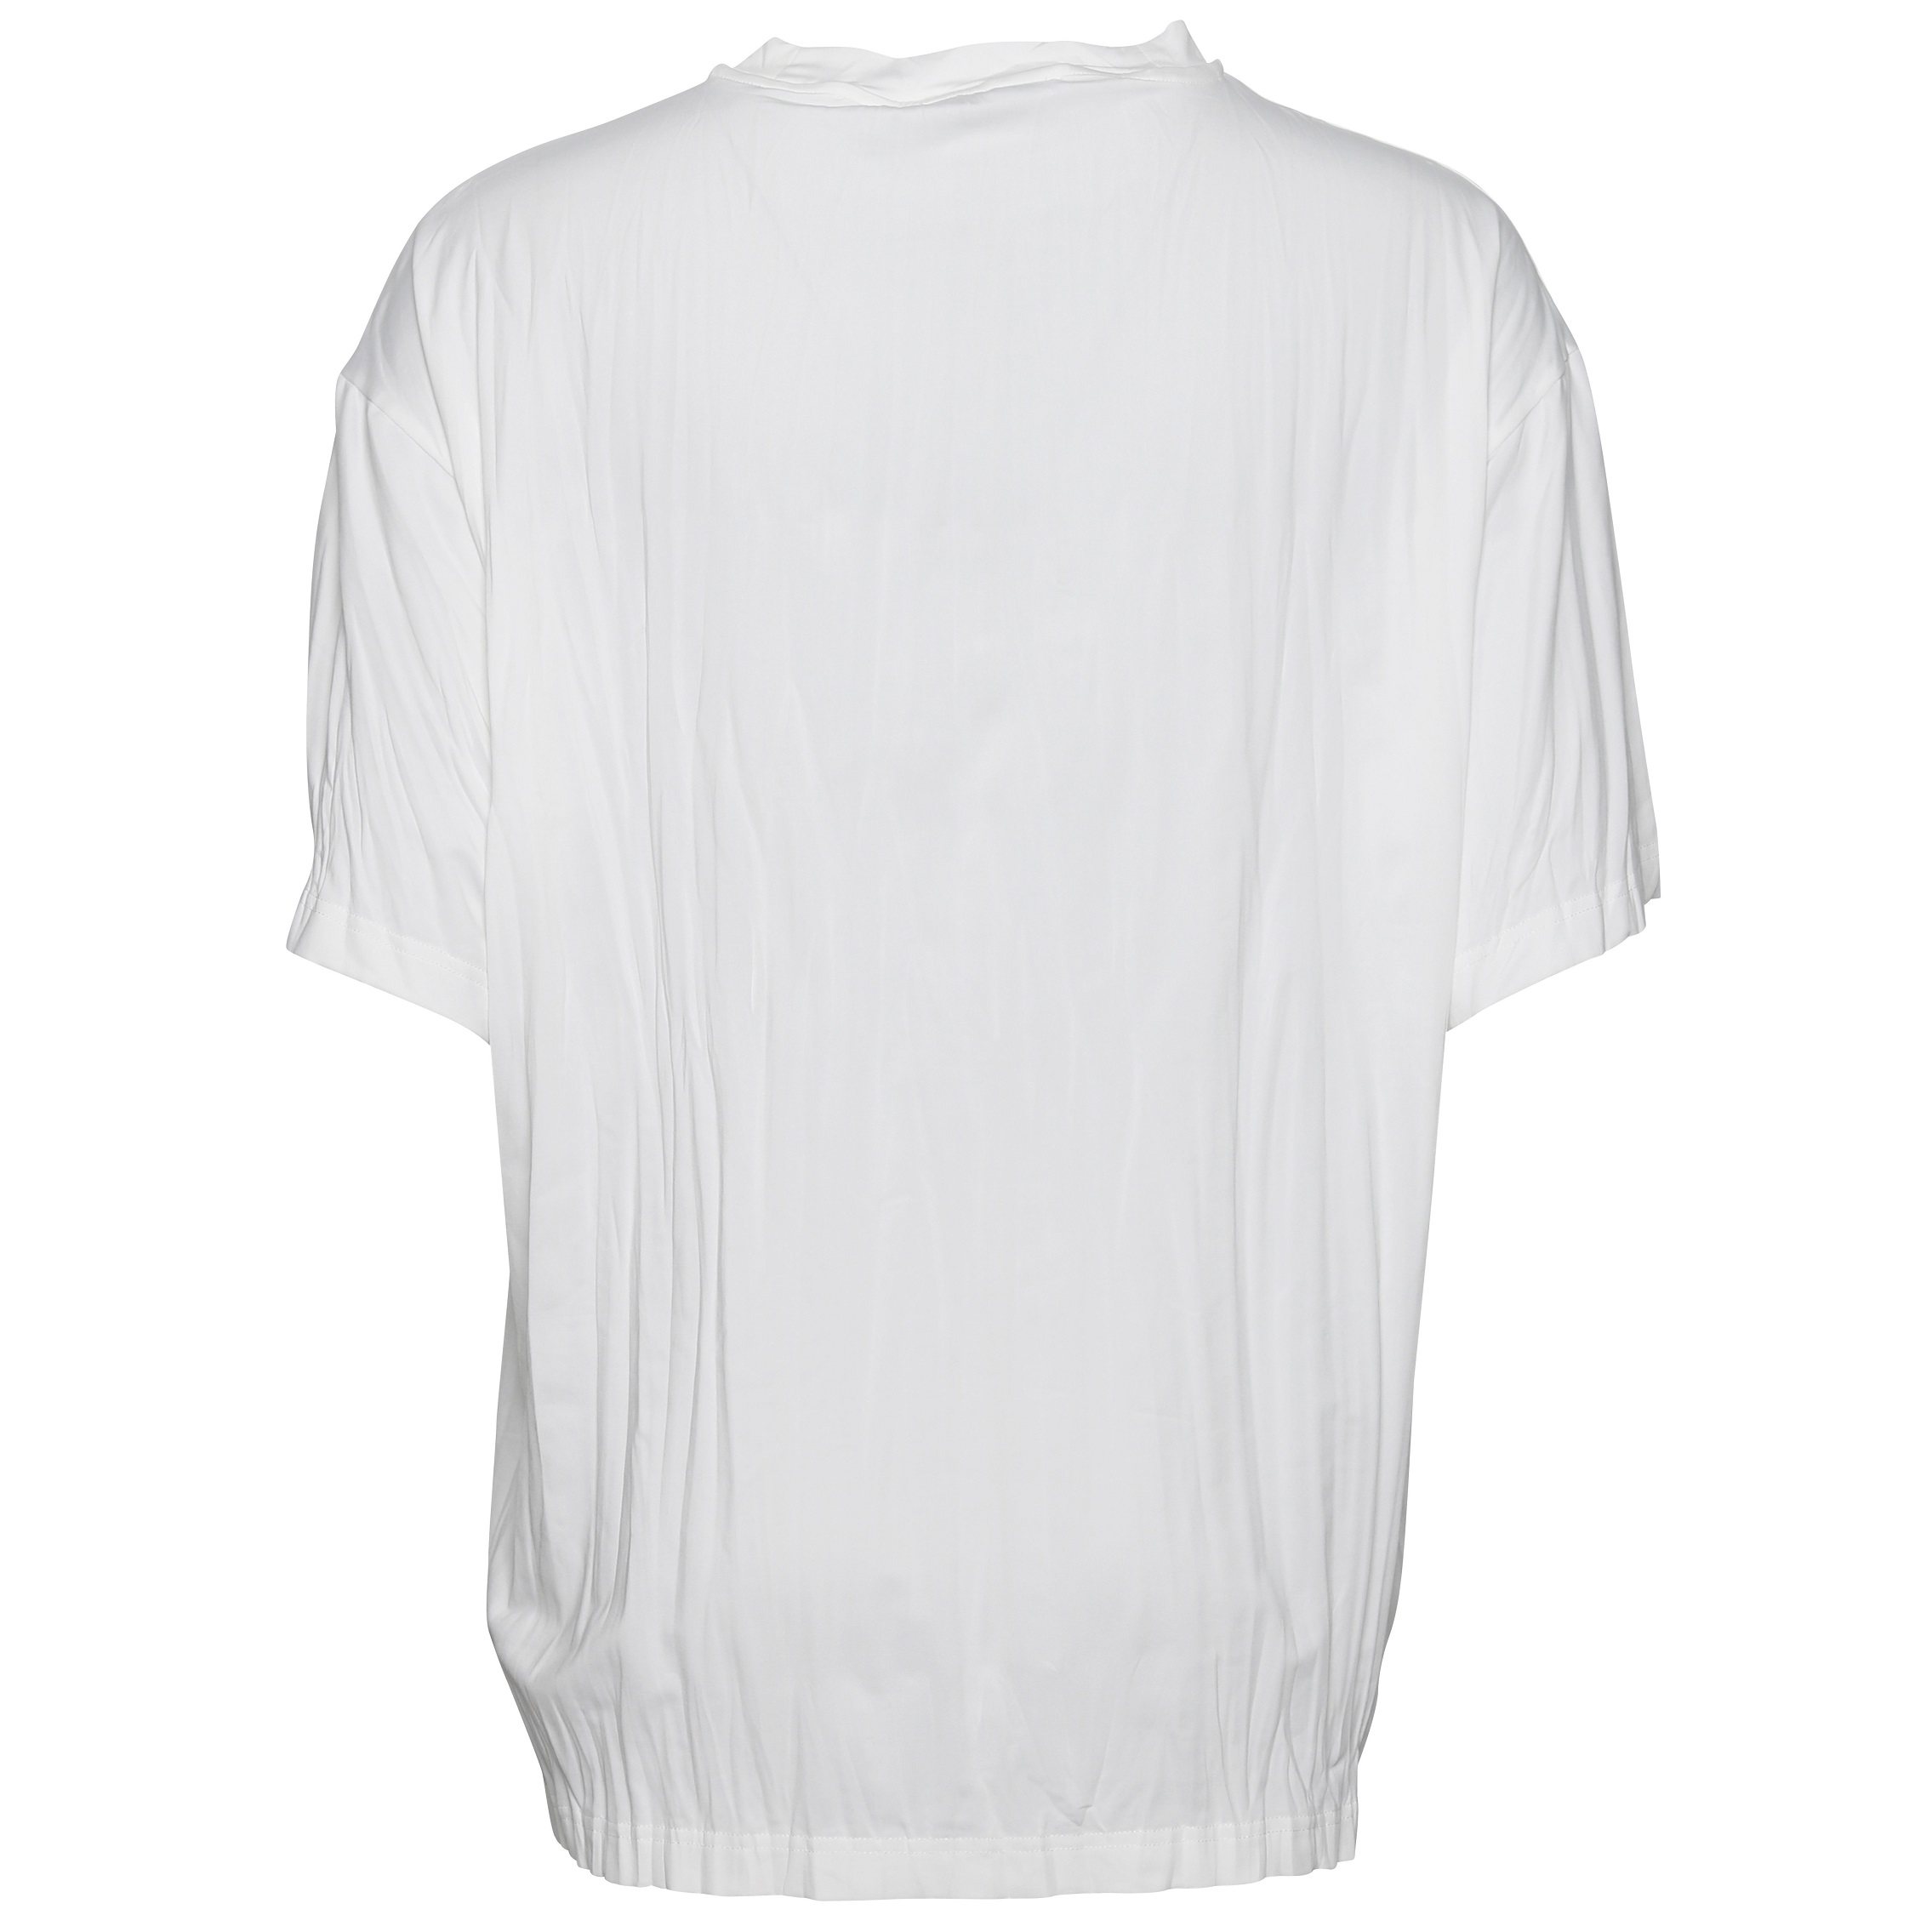 Acne Studios Pleated T-Shirt in White M